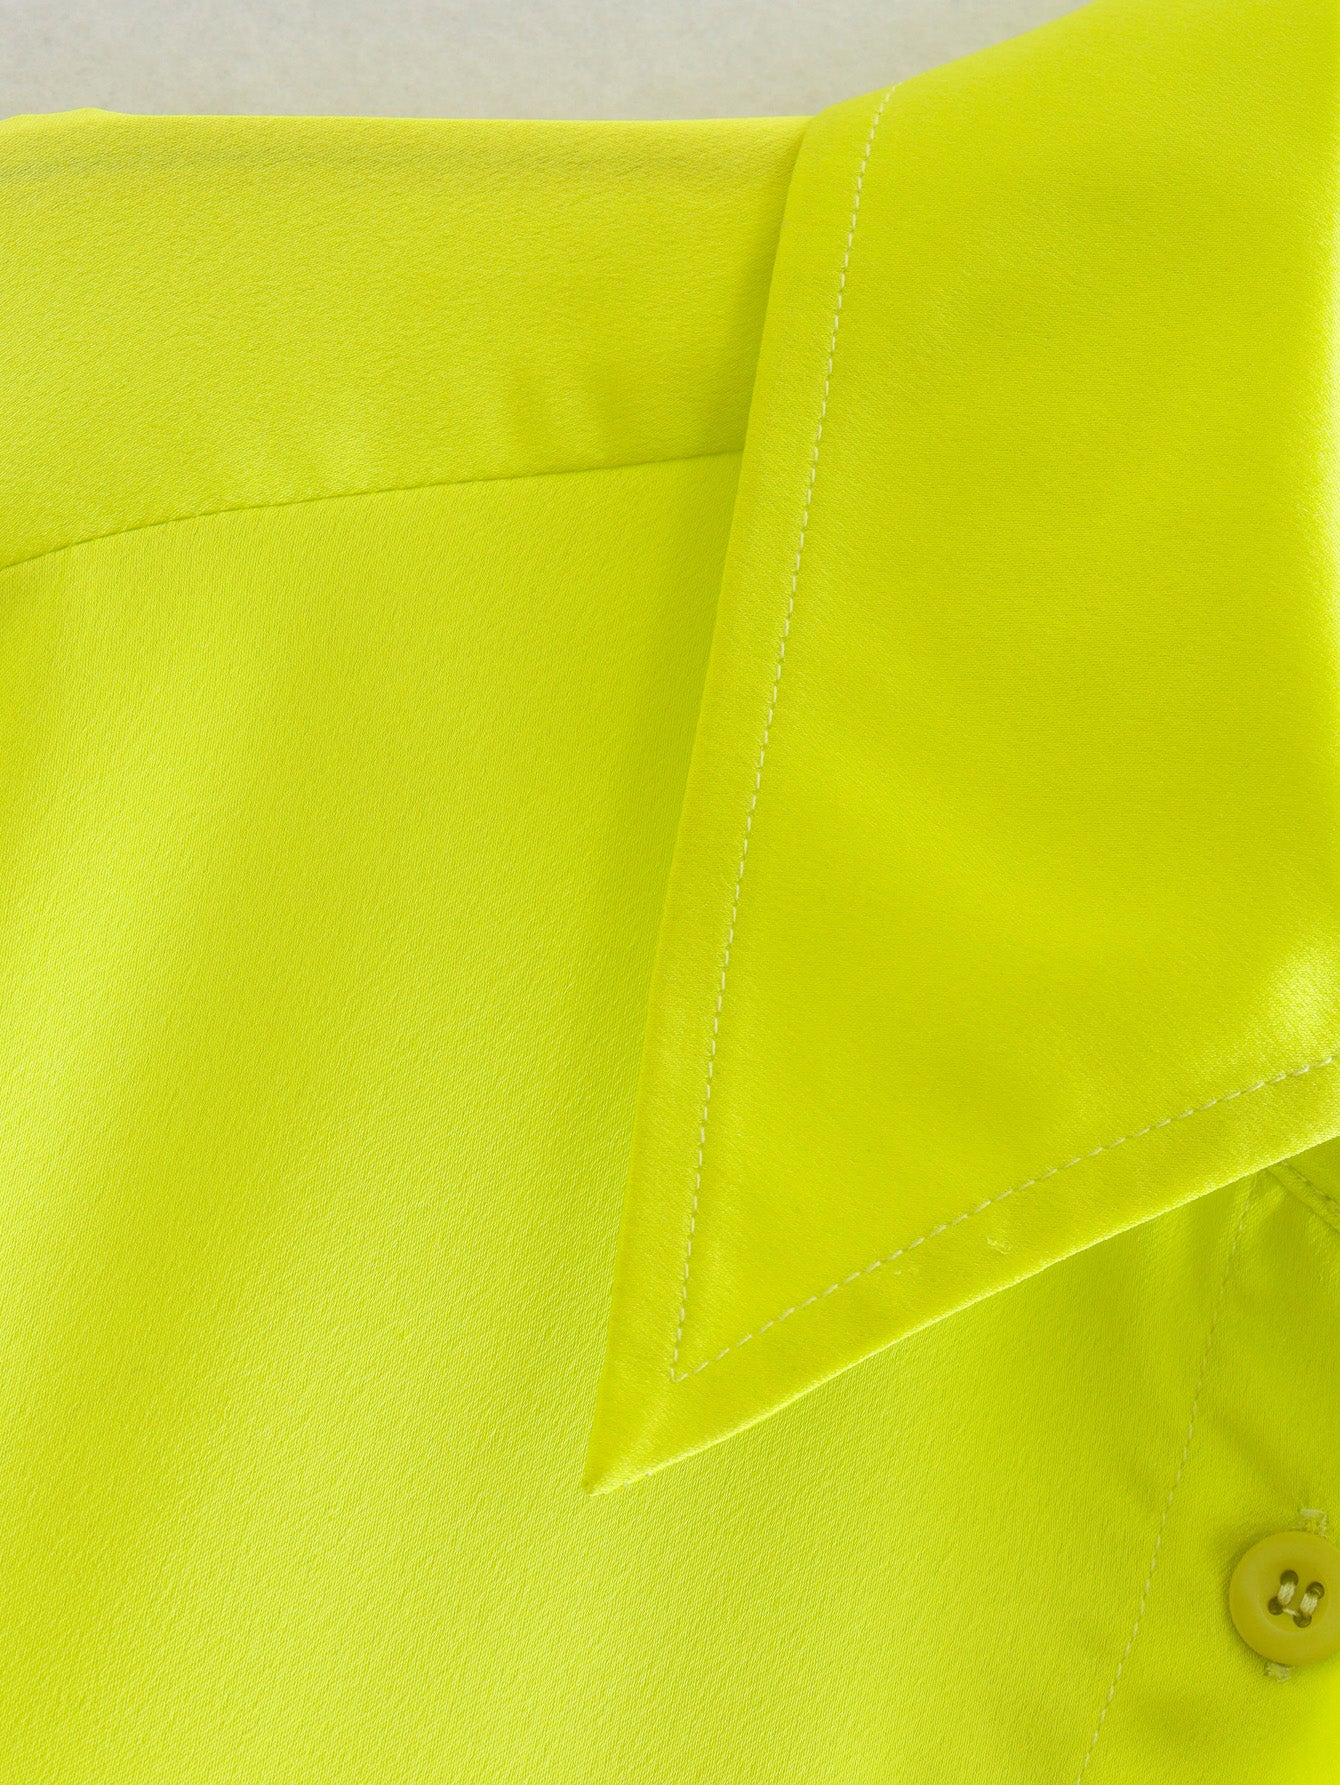 Fall Outfits 2022 | Neon Yellow Aesthetic Shirt